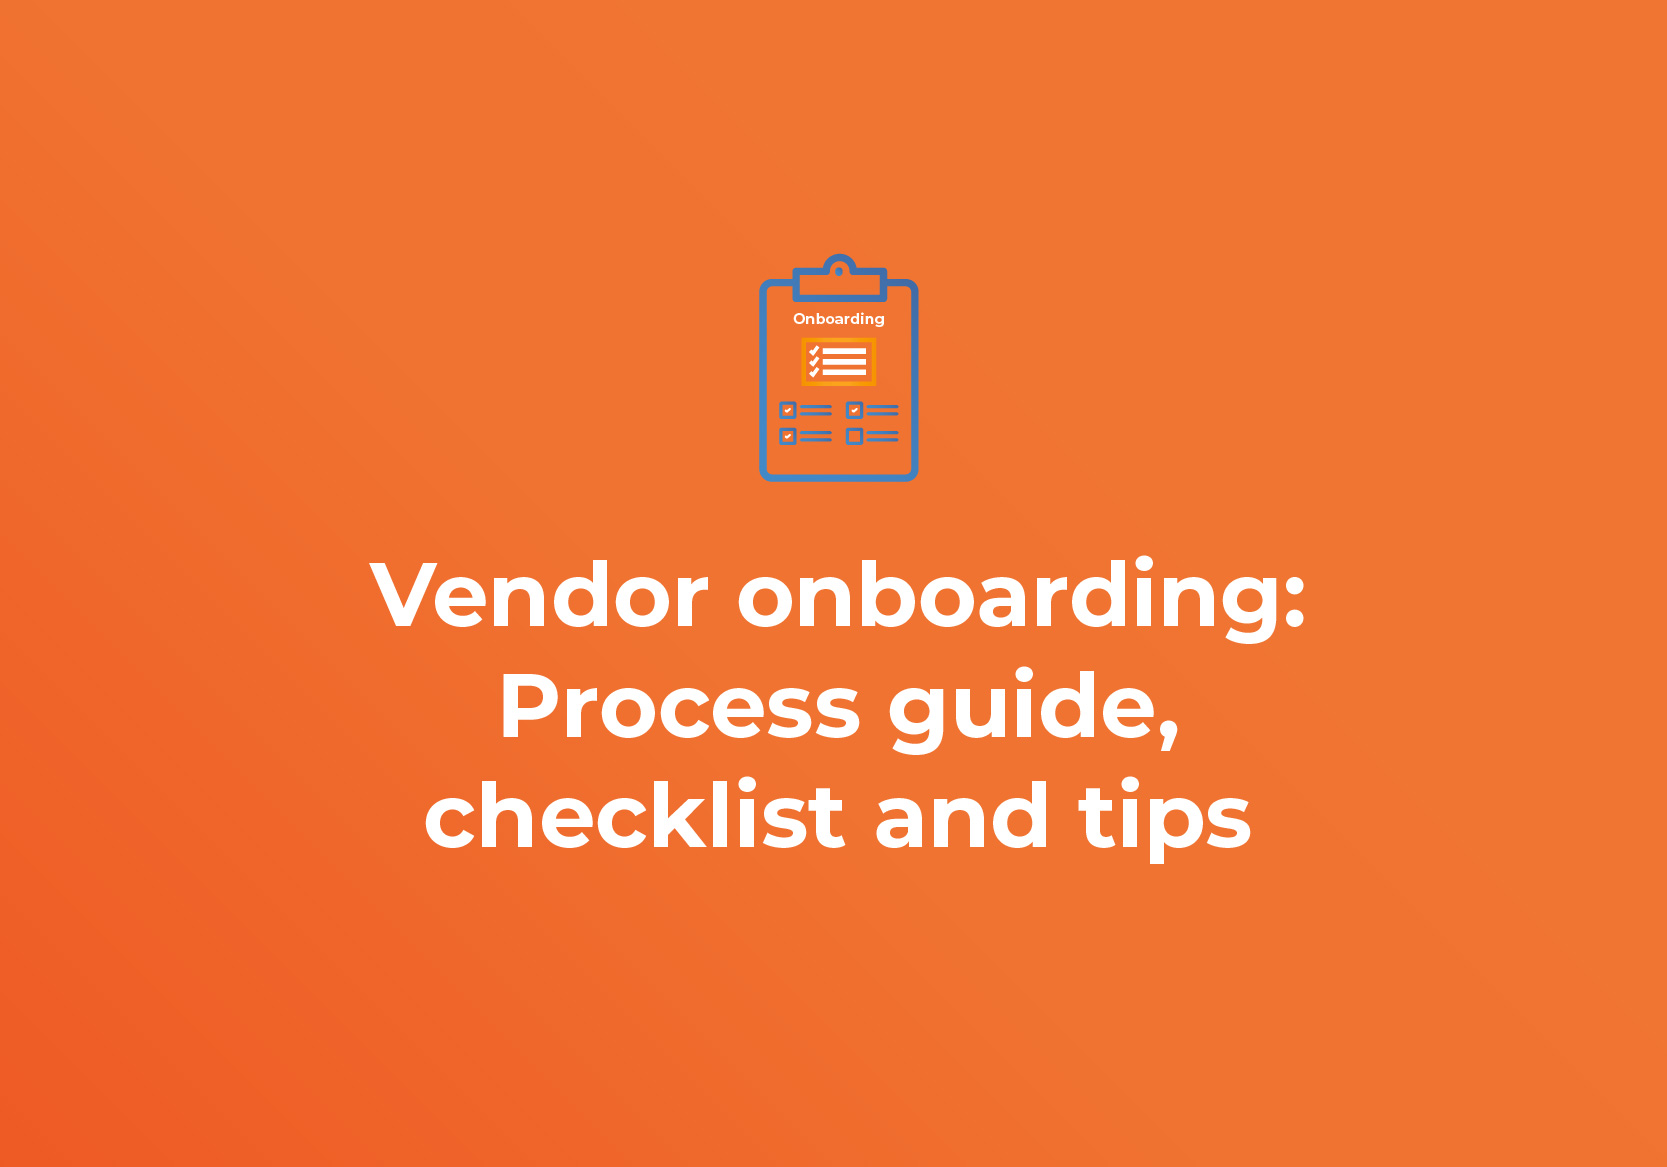 Vendor onboarding- Process guide, checklist and tips- RFP360